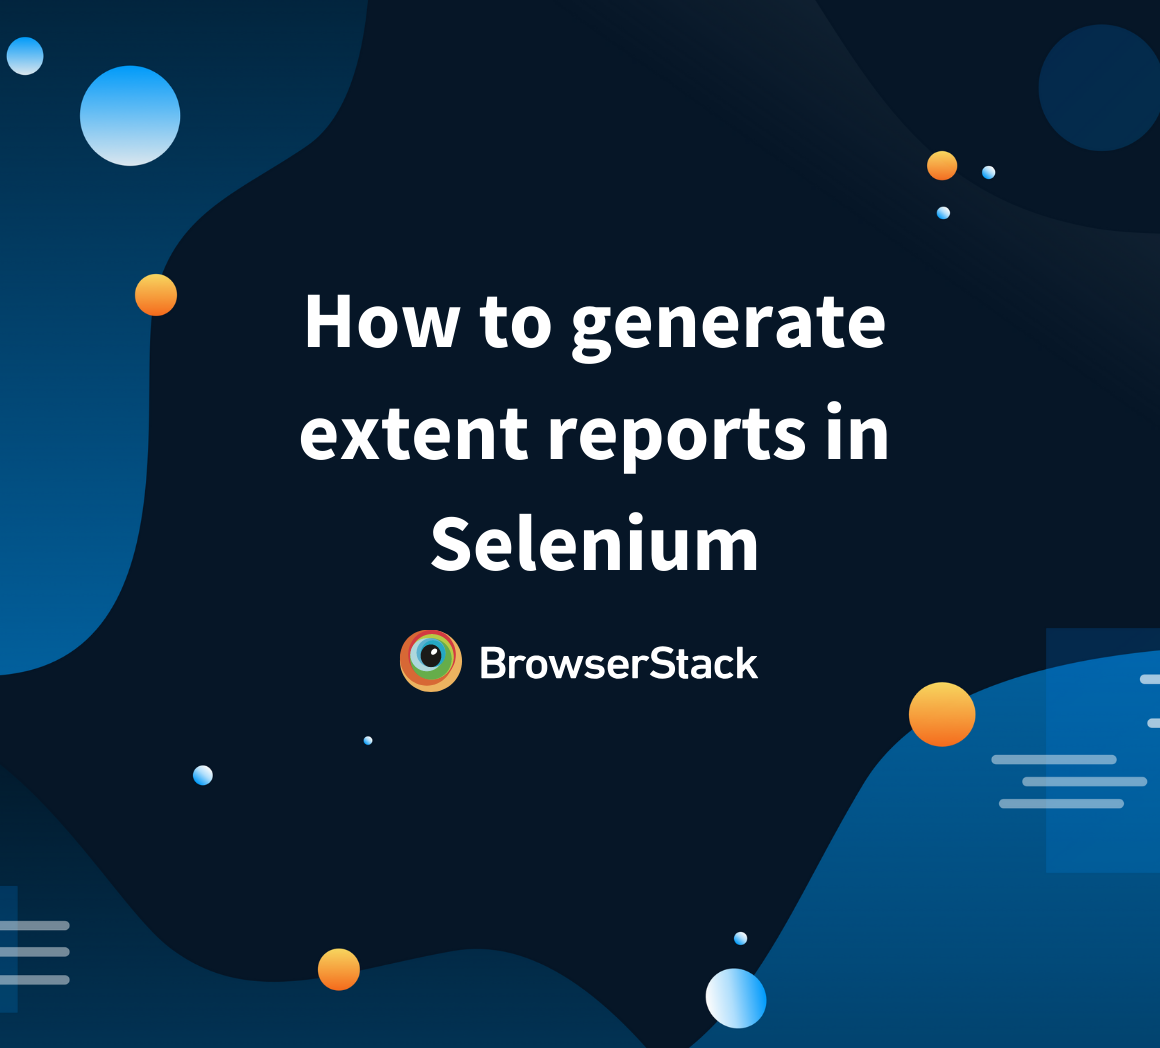 How to generate extent reports in Selenium